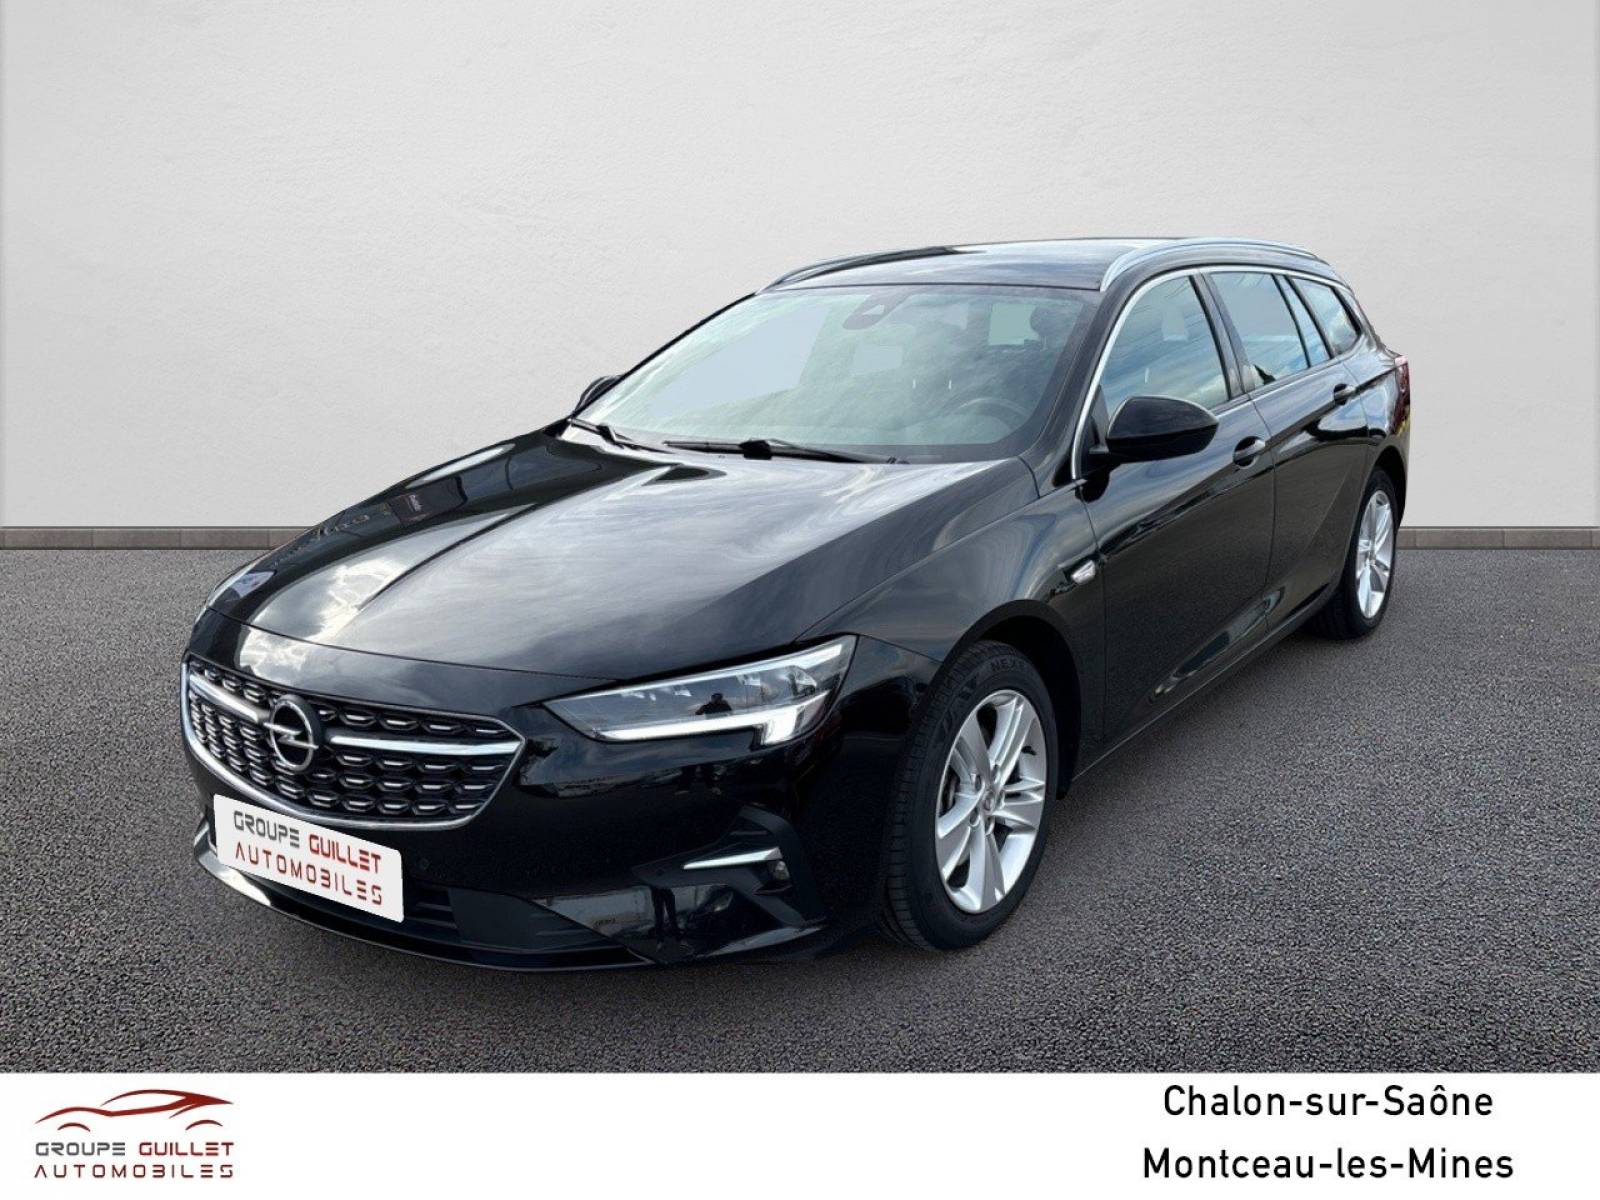 OPEL Insignia Sports Tourer 1.5 Diesel 122 ch - véhicule d'occasion - Groupe Guillet - Opel Magicauto Chalon - 71380 - Saint-Marcel - 1